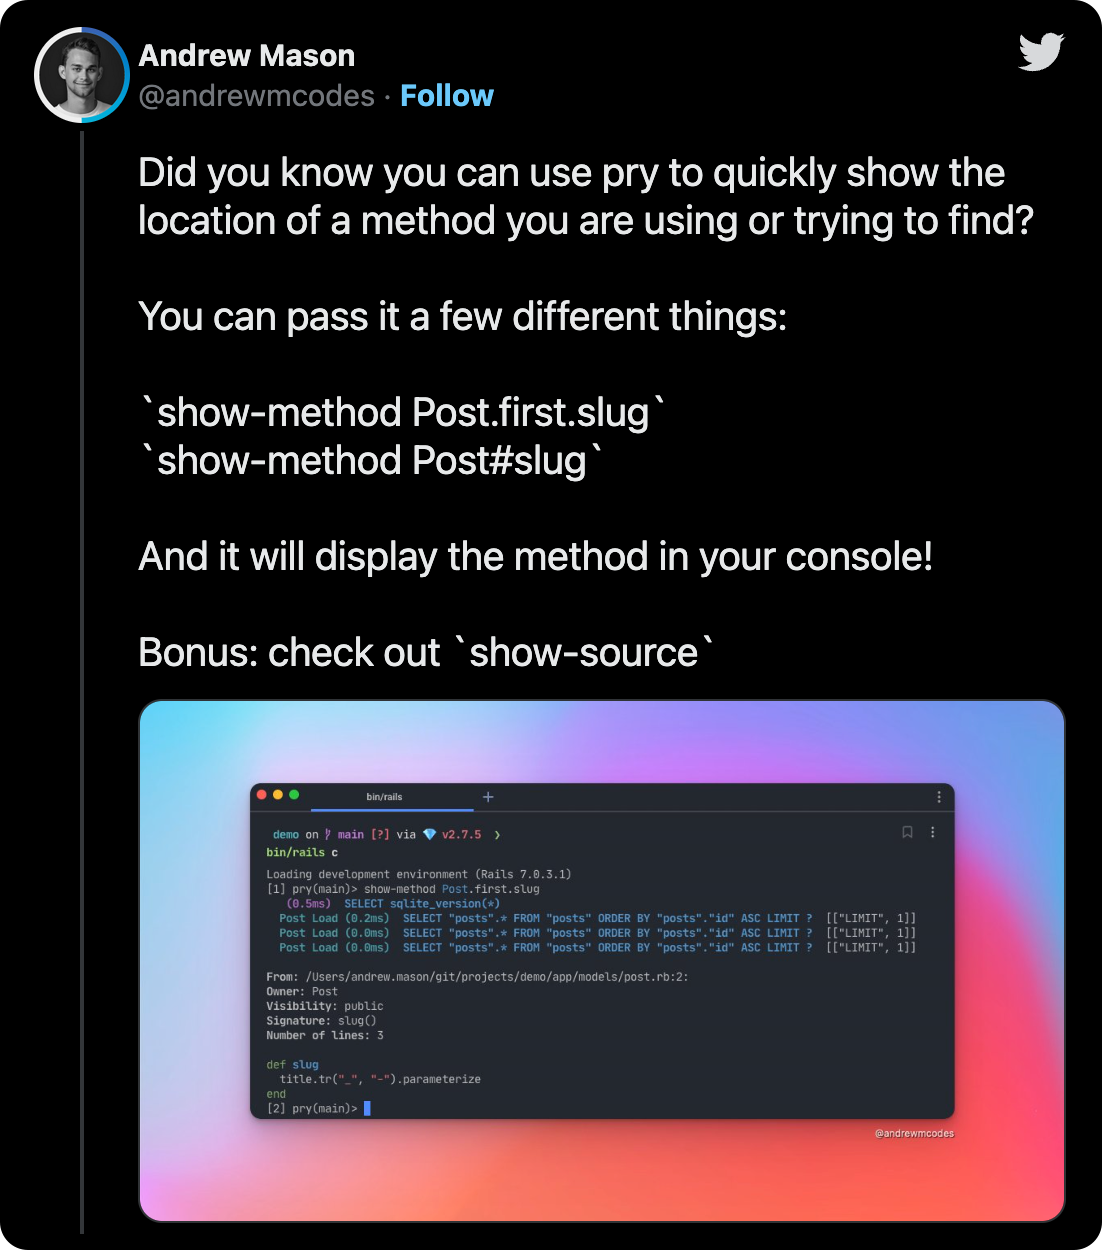 Did you know you can use pry to quickly show the location of a method you are using or trying to find? You can pass it a few different things: `show-method Post.first.slug` `show-method Post#slug` And it will display the method in your console! Bonus: check out `show-source`